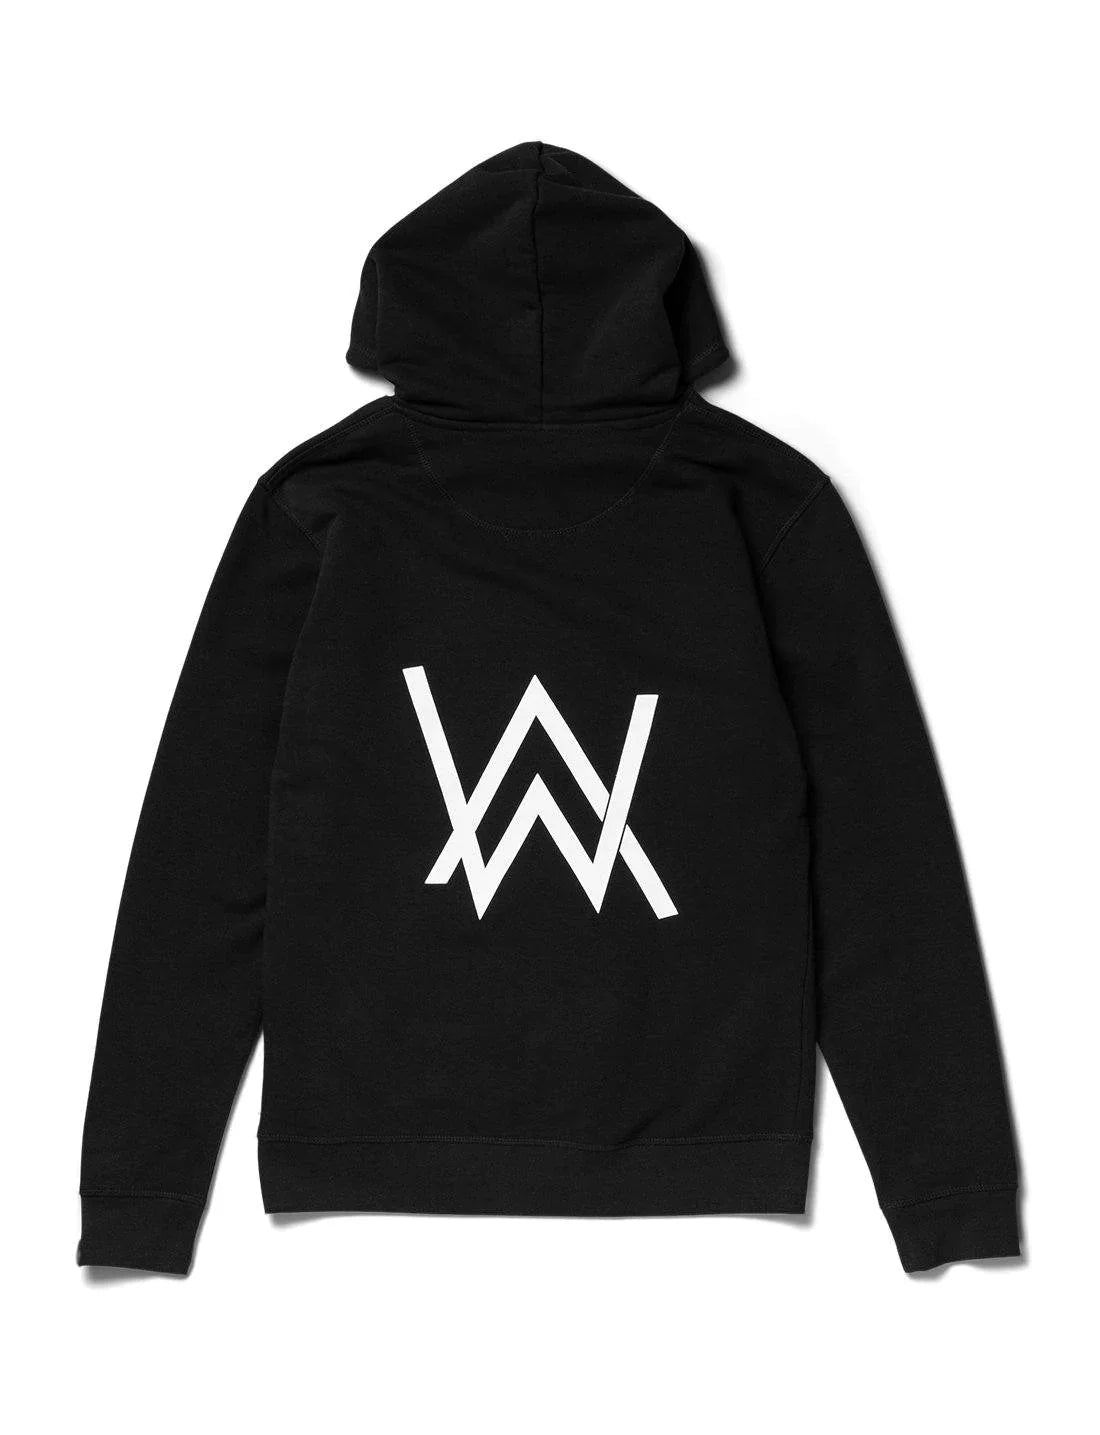 Back view of the Alan Walker Core Logo Hoodie in black, showcasing a bold white 'AW' logo on the back for a statement look, perfect for fans of the music artist's signature style.